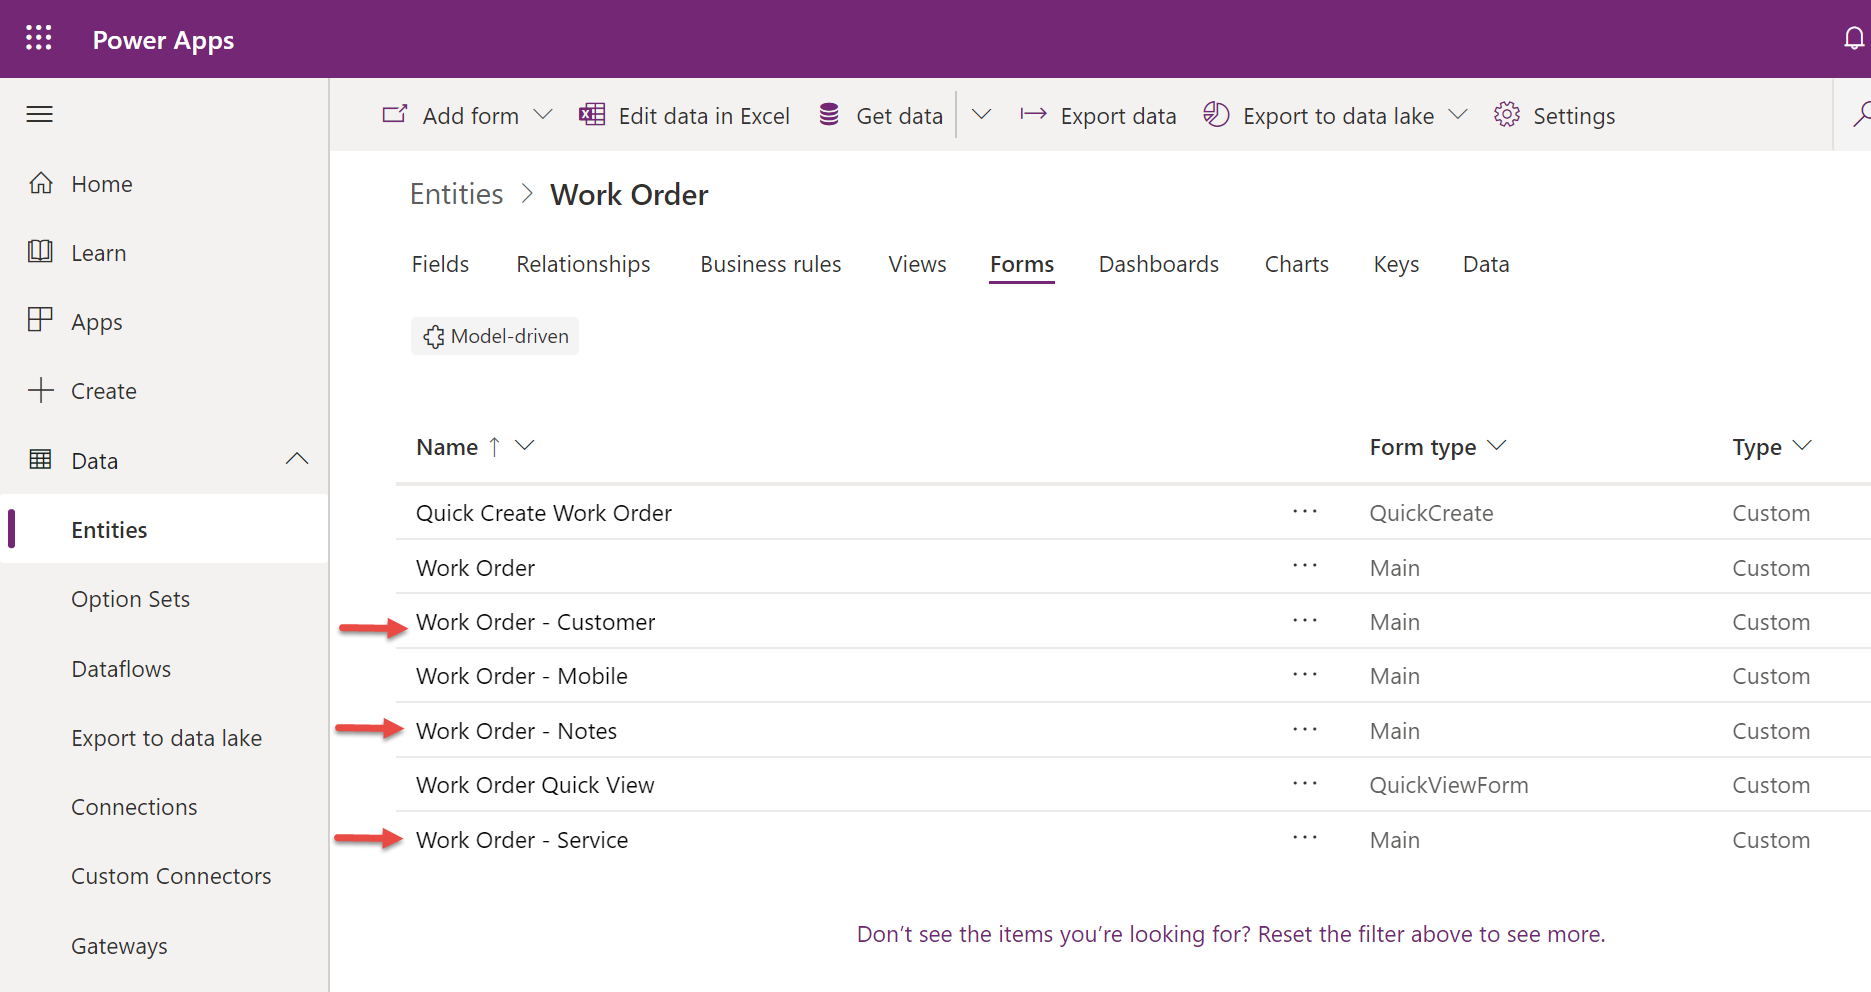 Screenshot of Power Apps showing the work order form details.